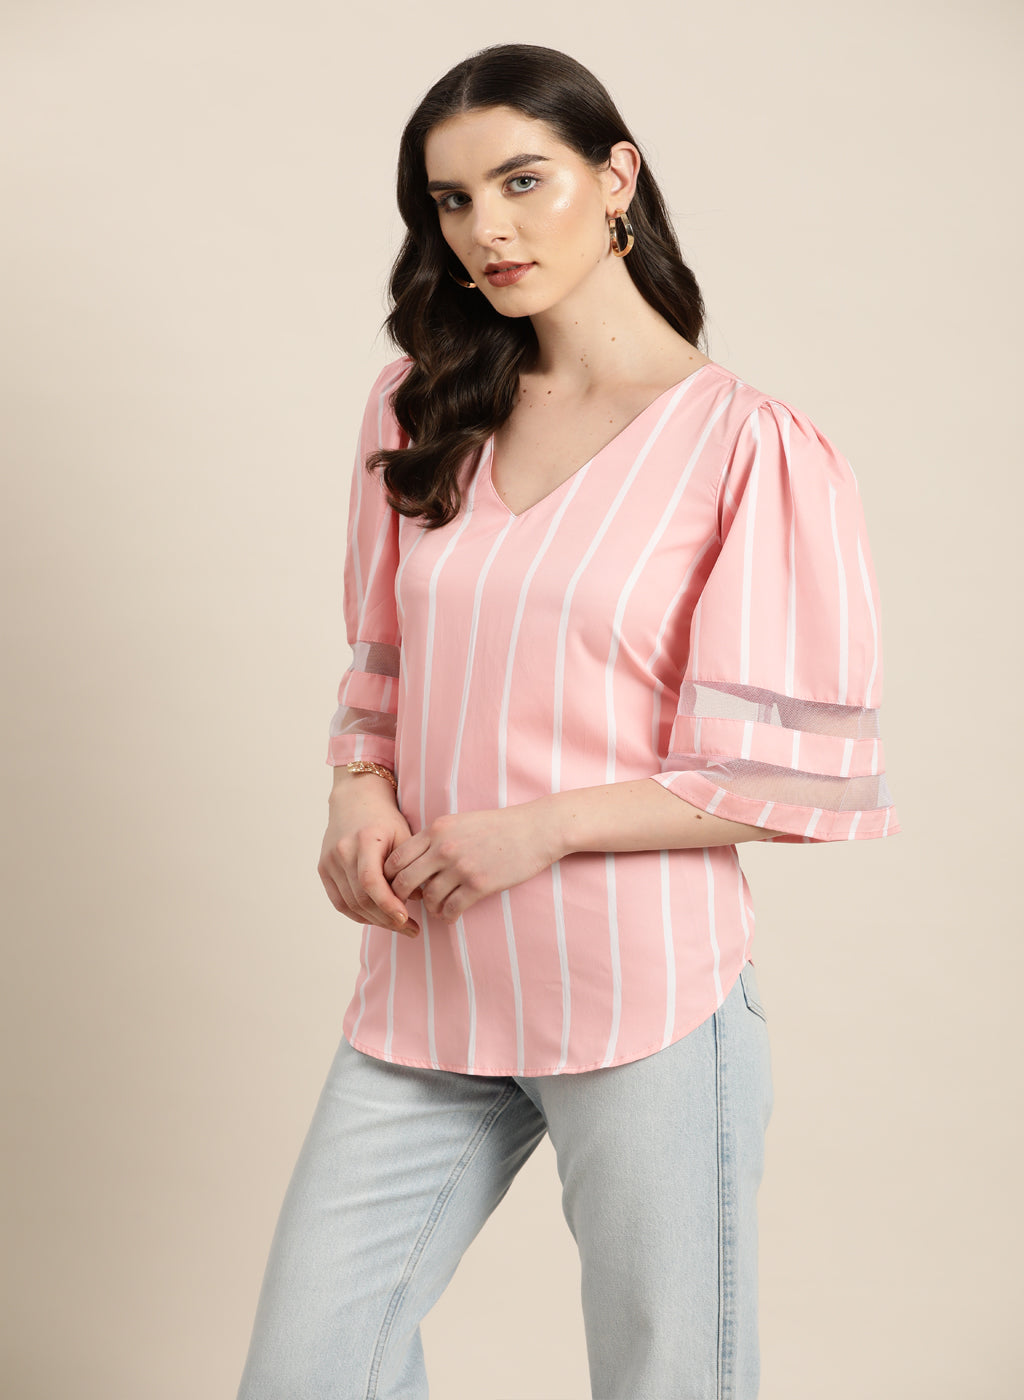 Pink and white stripe crepe top